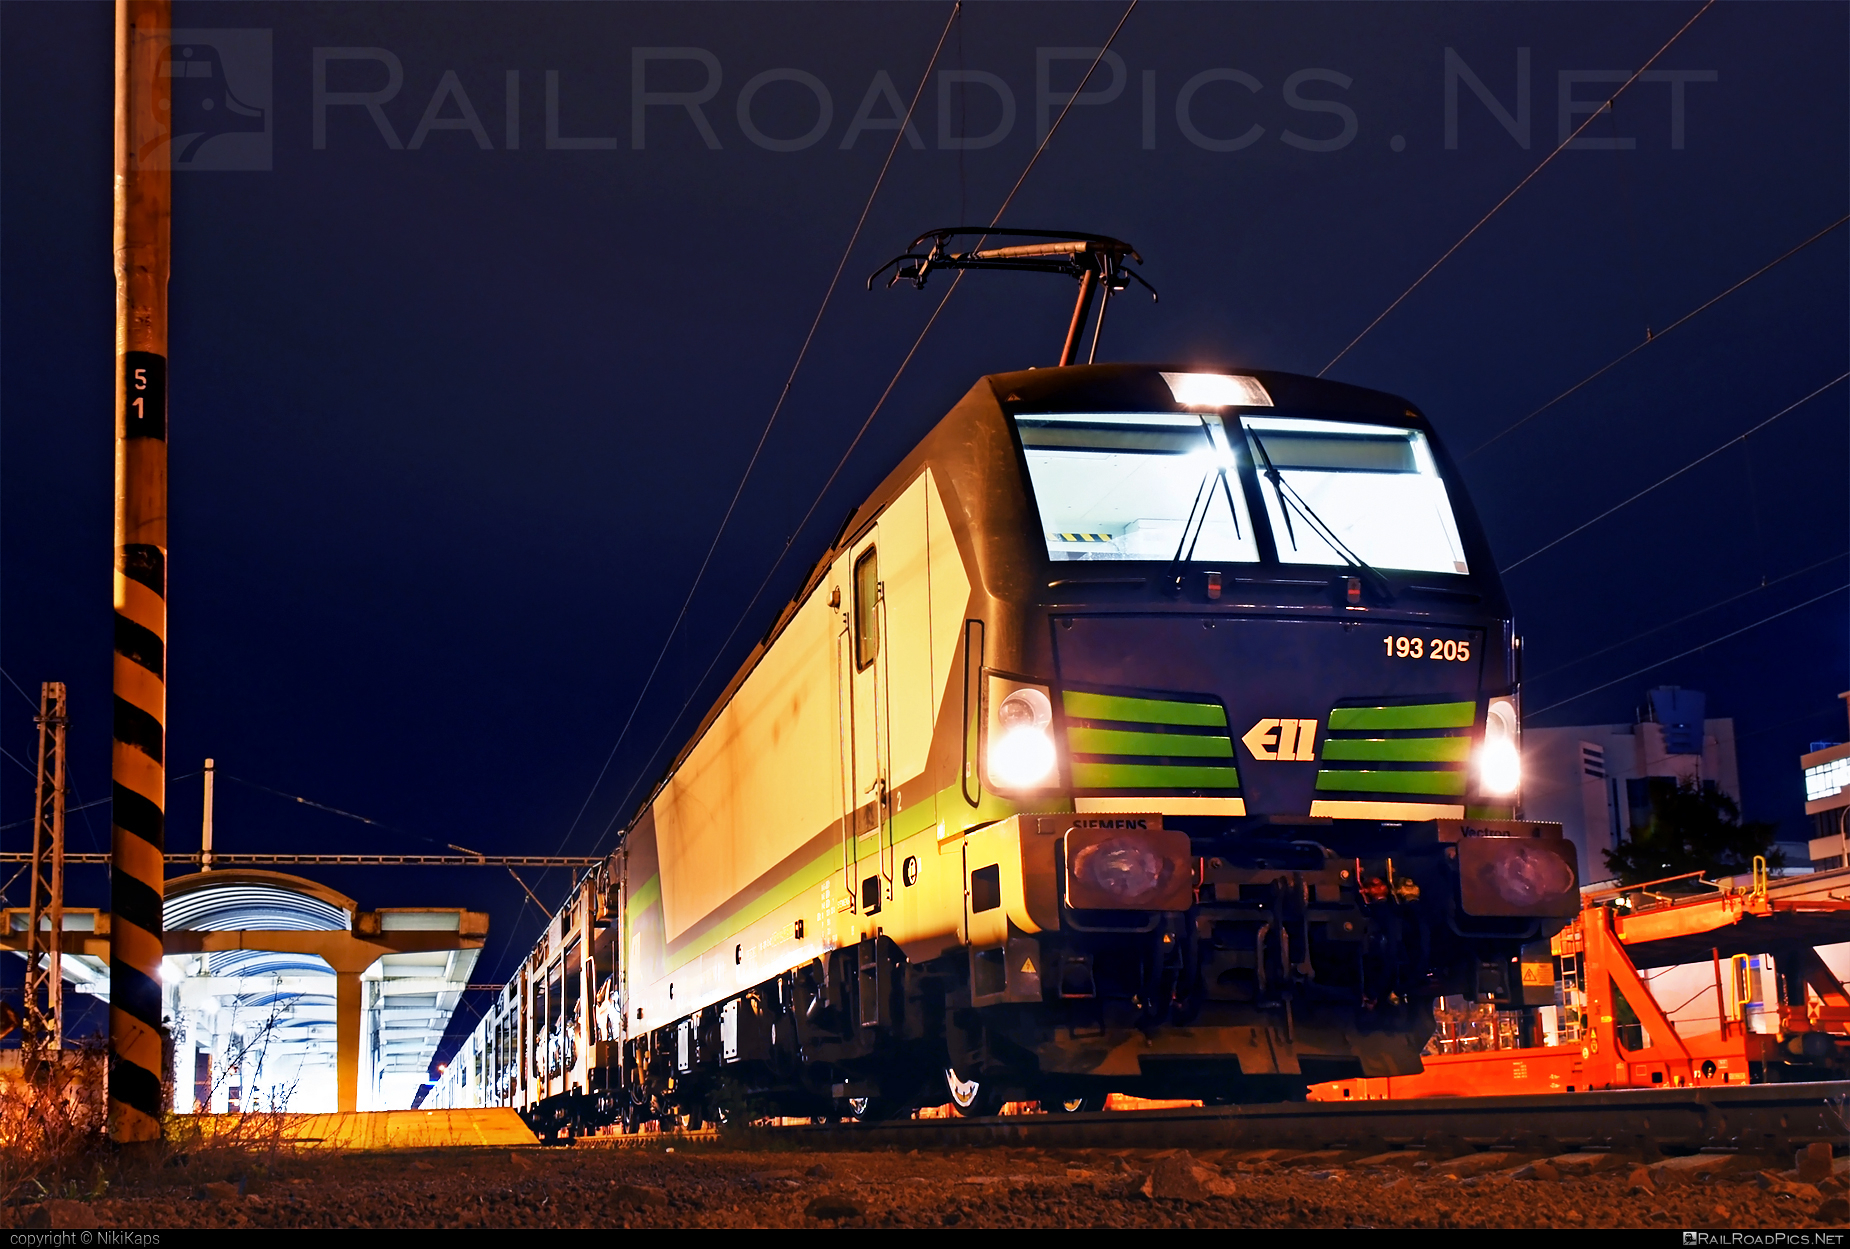 Siemens Vectron MS - 193 205 operated by Retrack GmbH & Co. KG #carcarrierwagon #ell #ellgermany #eloc #europeanlocomotiveleasing #retrack #retrackgmbh #siemens #siemensVectron #siemensVectronMS #vectron #vectronMS